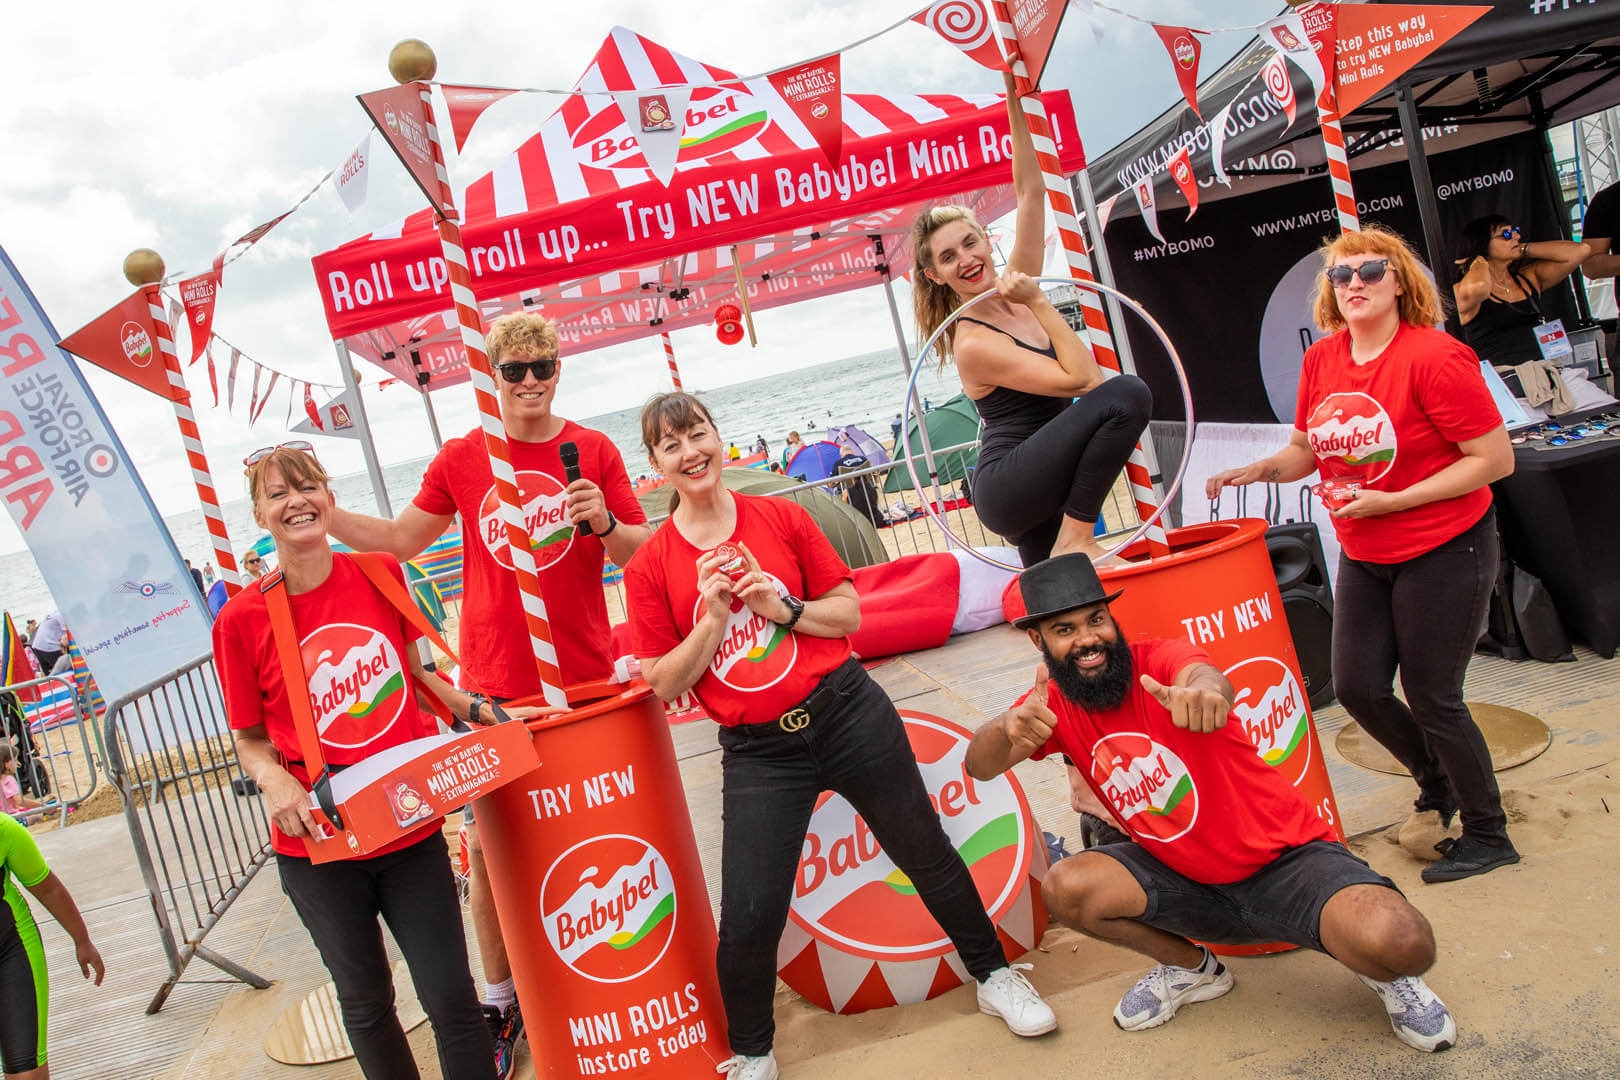 The Babybel team dressed up in the red at their trade stand for the Air show